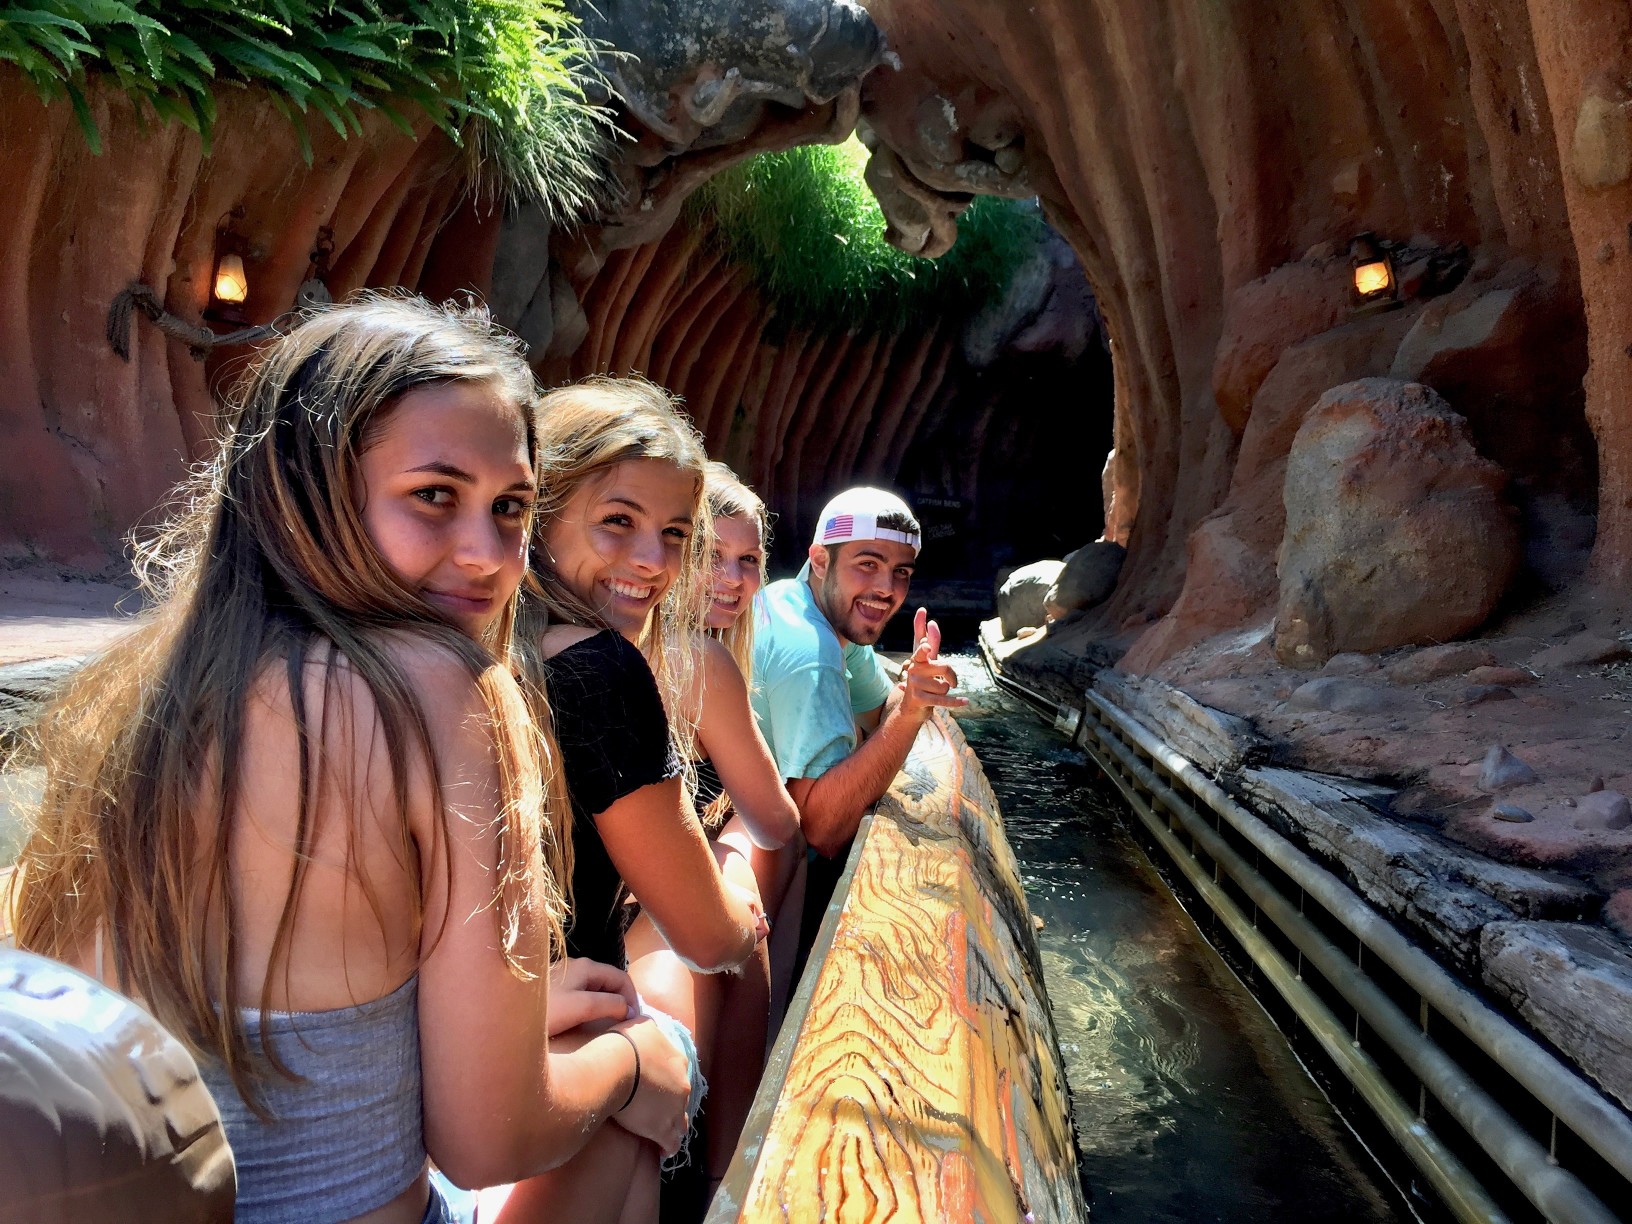 Check Out These Attractions for Even More Things To Do in Orange County